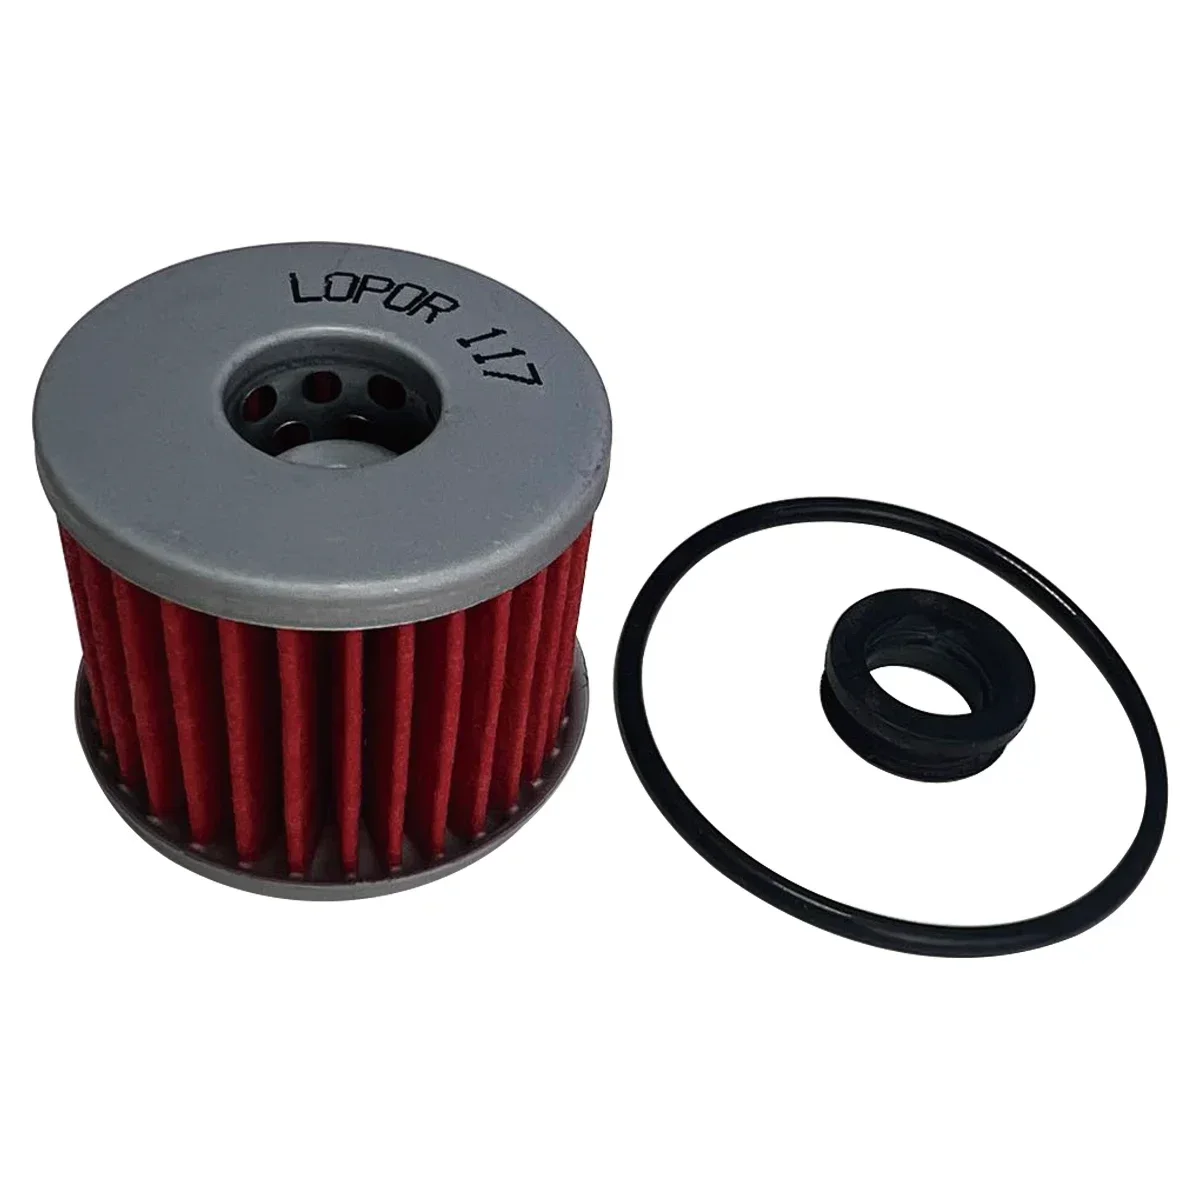 Motorcycle Oil Filter For Honda Scooter C125 A Super Cub 700 Integra NSS750 M Forza DCT 750 Integra NC750 X-ADV 750 ADV750 HF117 for honda adv150 xadv750 x adv750 x adv 750 xadv adv750 accessories front rear turn signal light protection shield guard cover